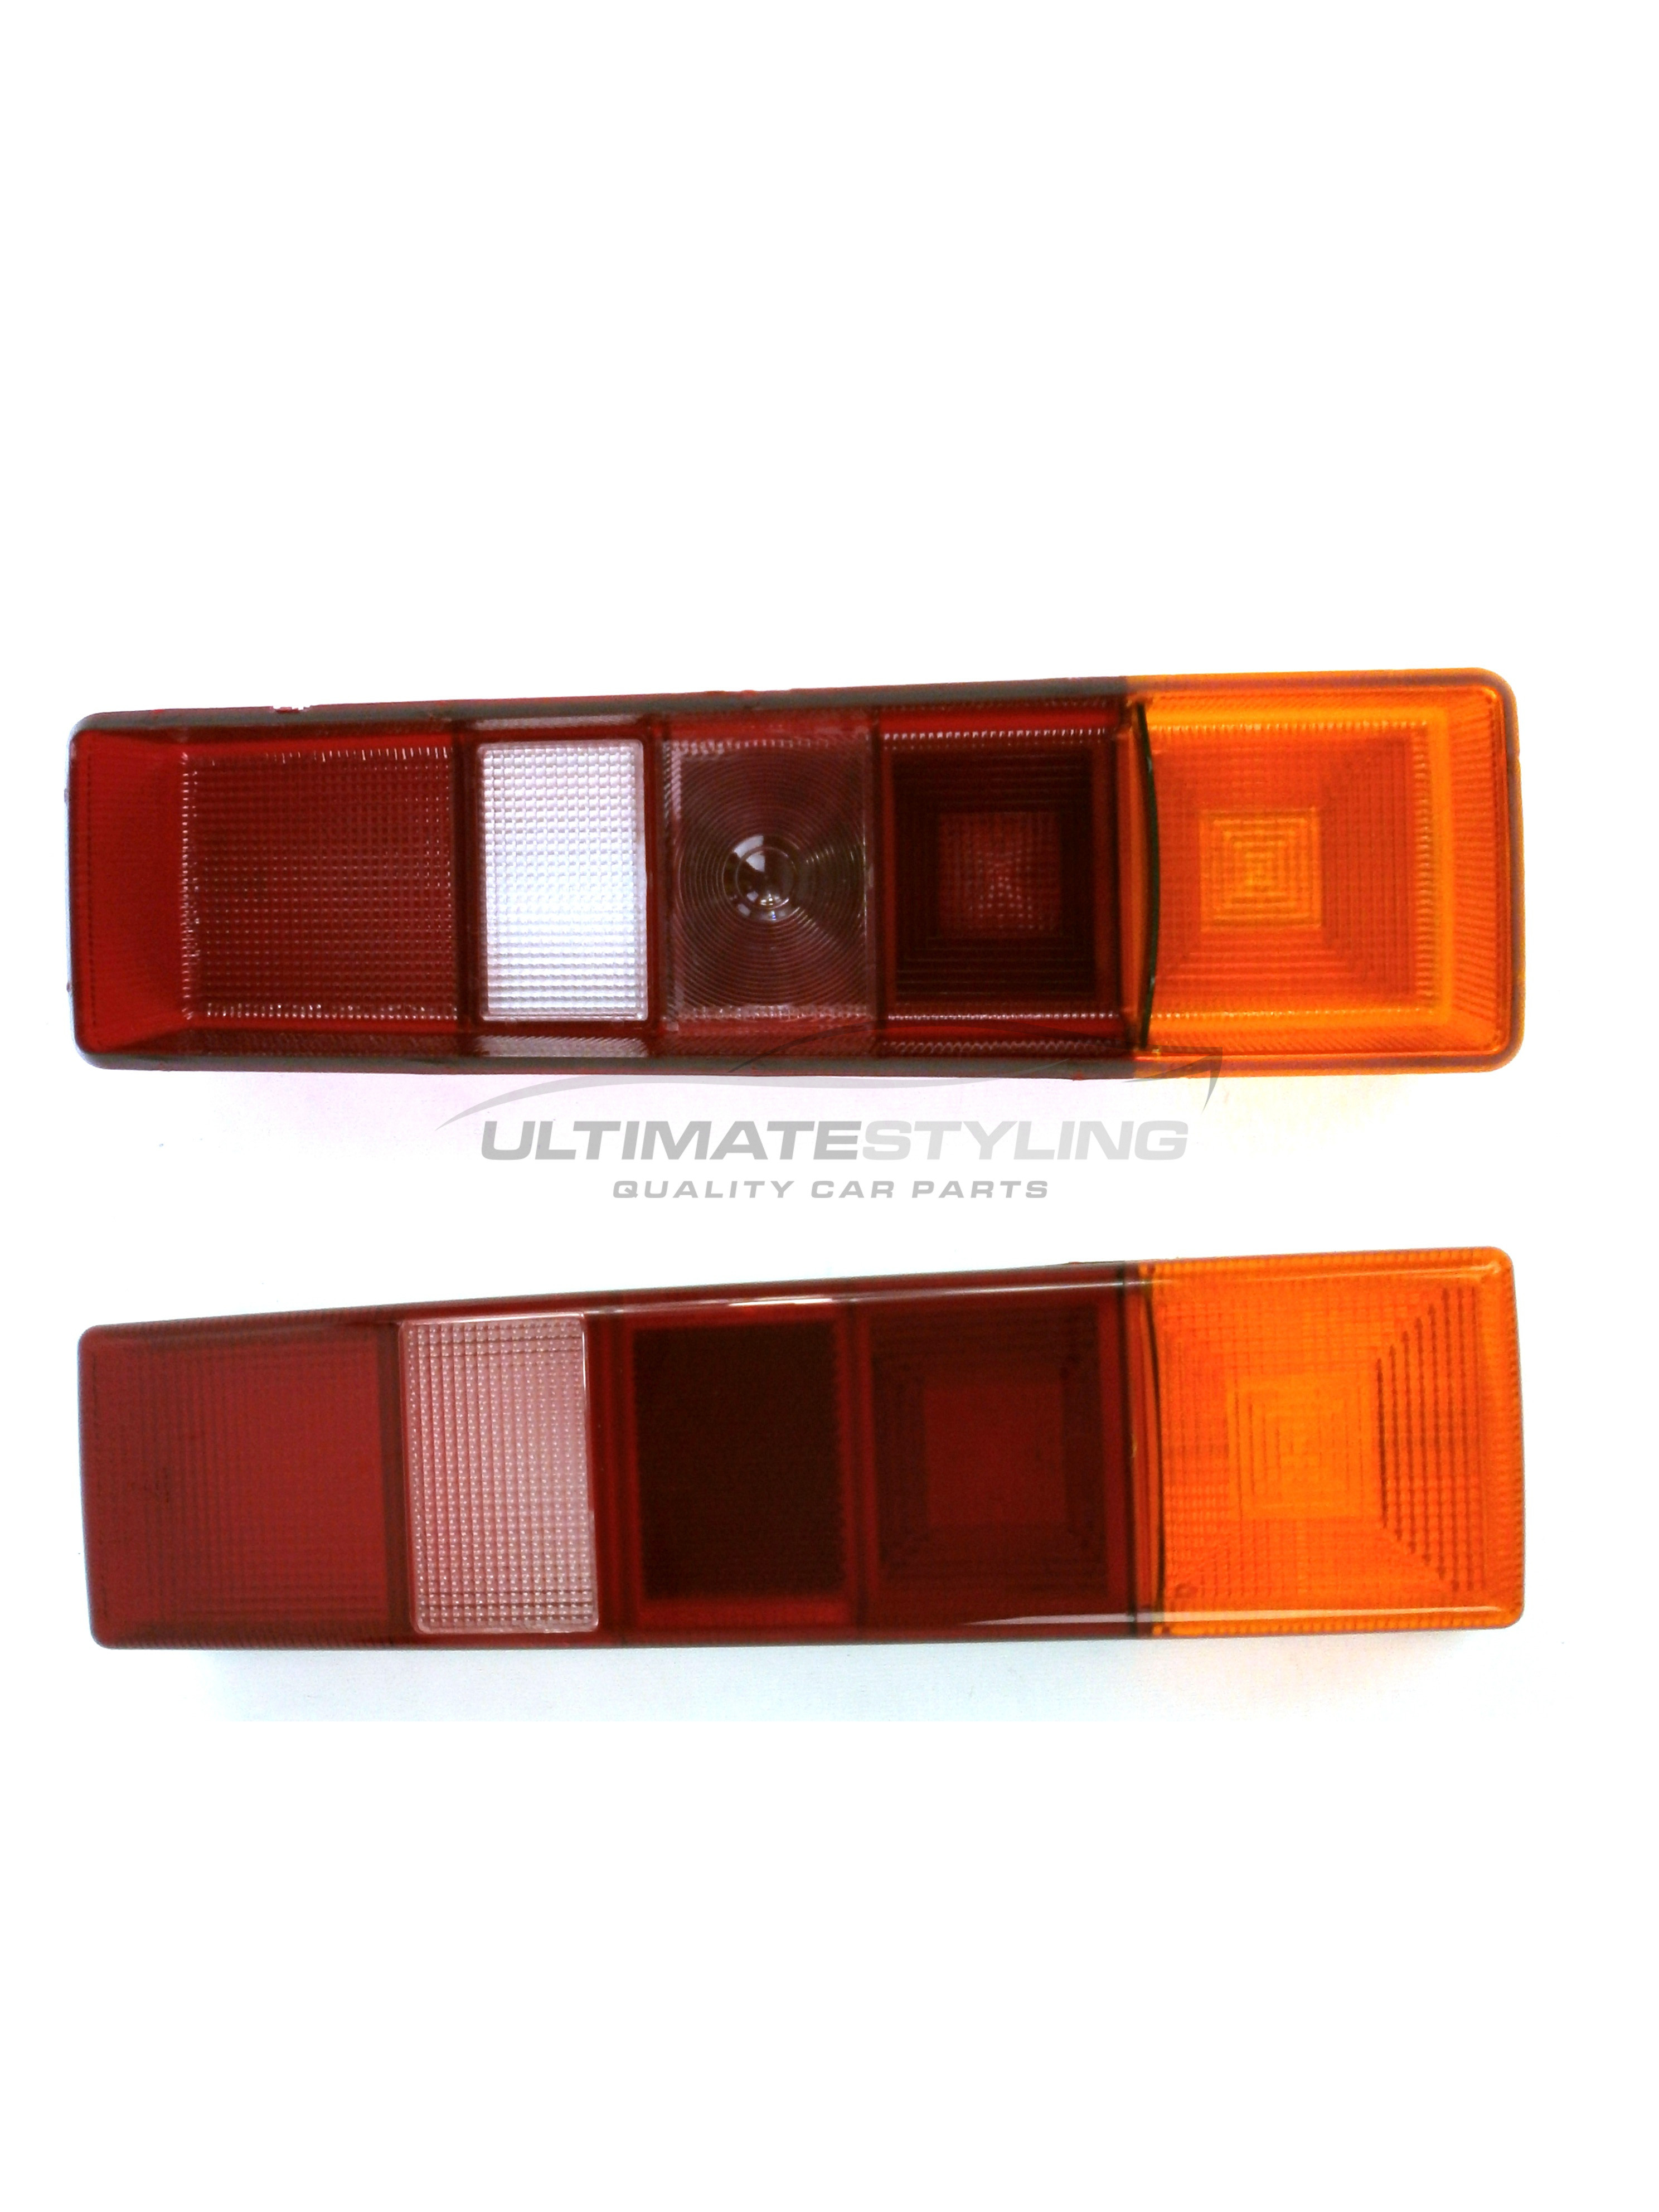 Transit Parts Transit MK5 Chassis Cab Pick Up Rear Lamp Light Lens 94 On Brand New 